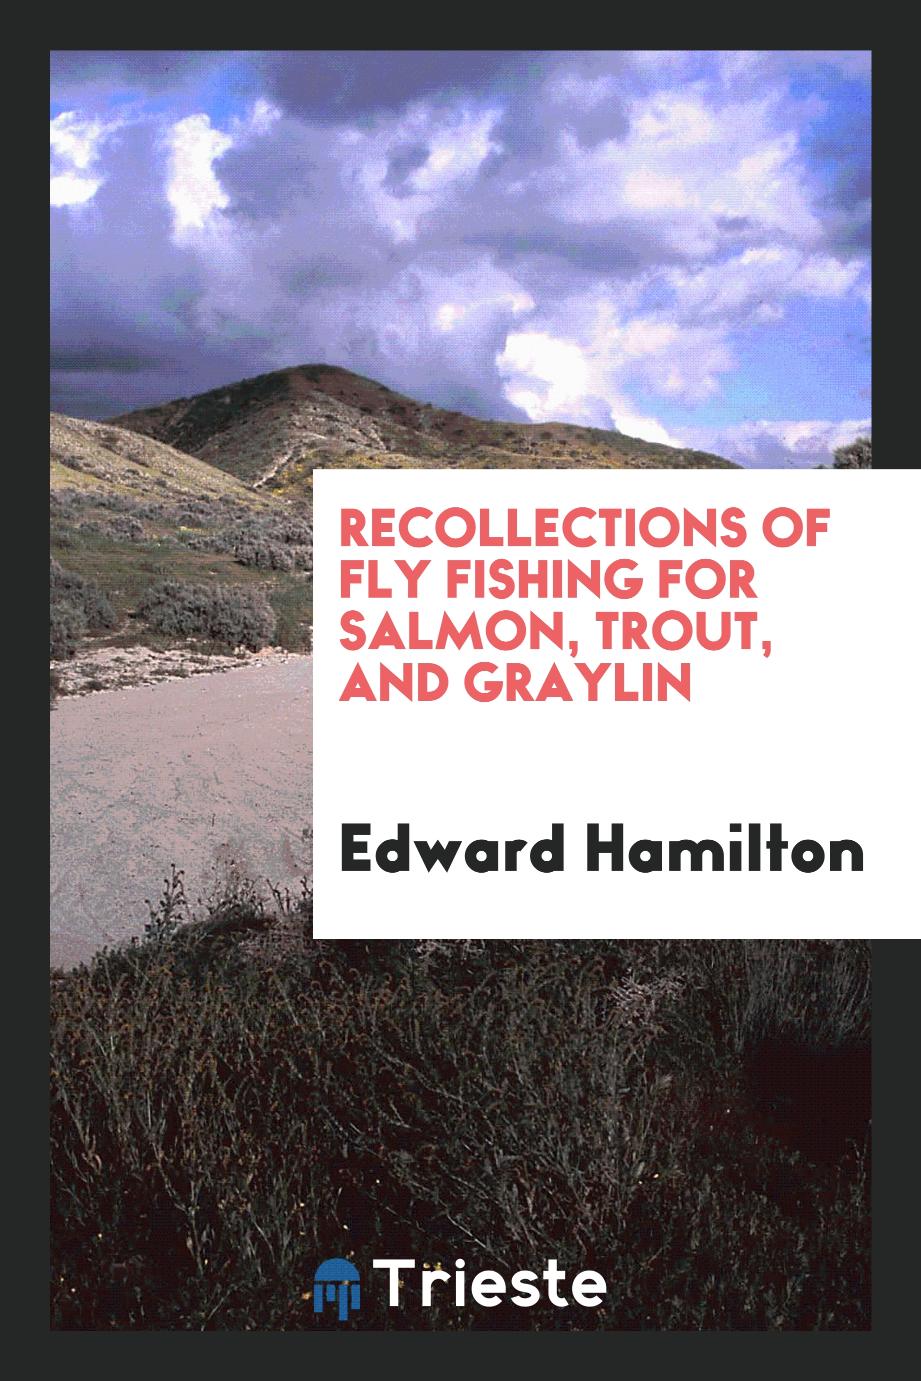 Recollections of Fly Fishing for Salmon, Trout, and Graylin